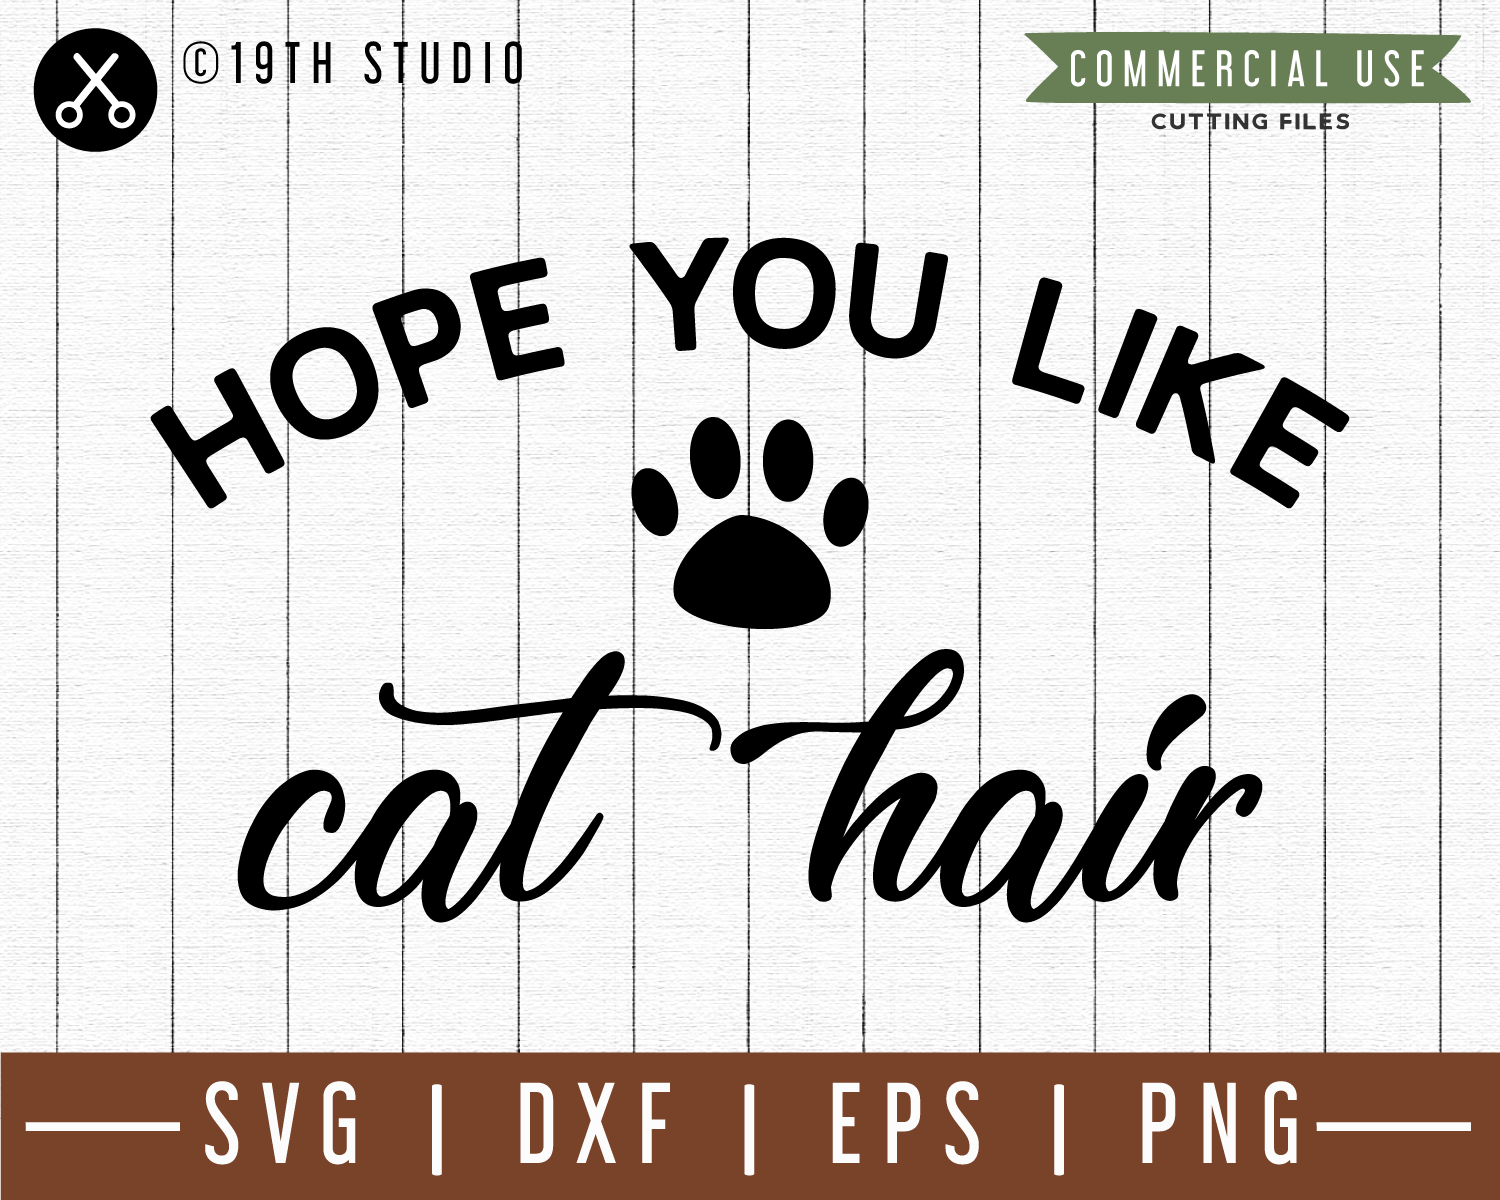 Hope you like cat hair SVG | M49F | A Doormat SVG file Craft House SVG - SVG files for Cricut and Silhouette